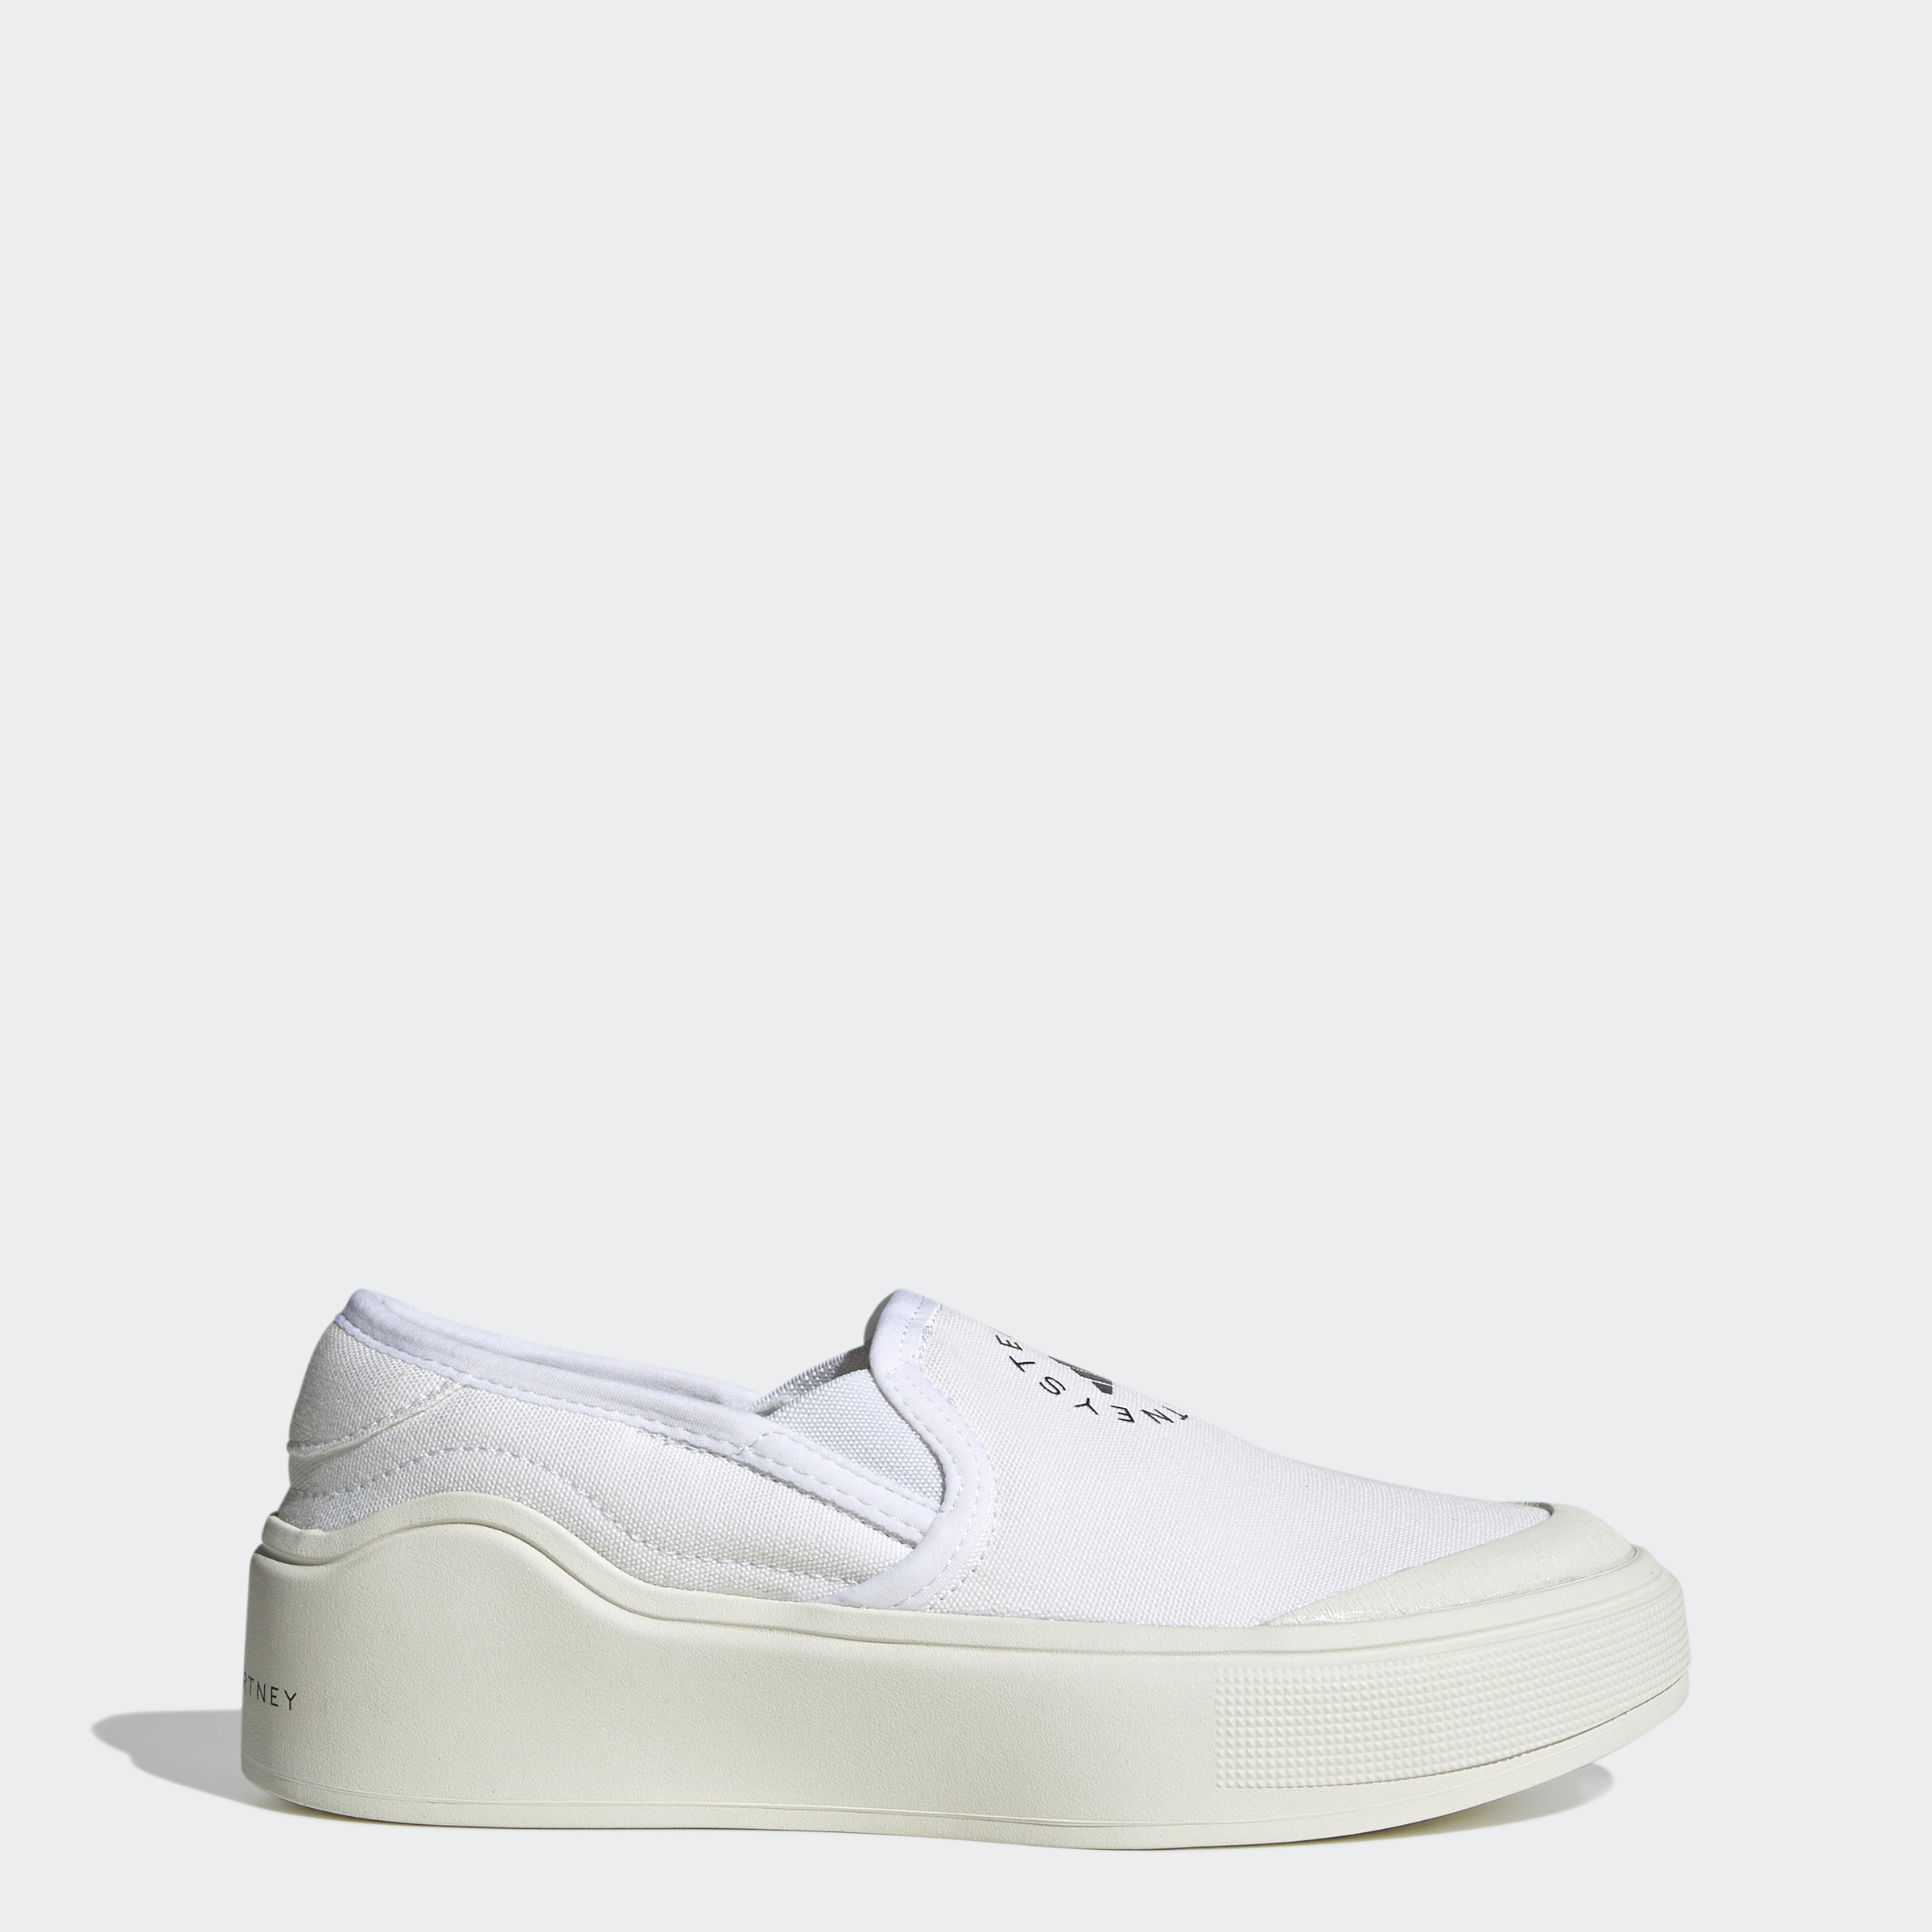 adidas by Stella McCartney Court Shoes